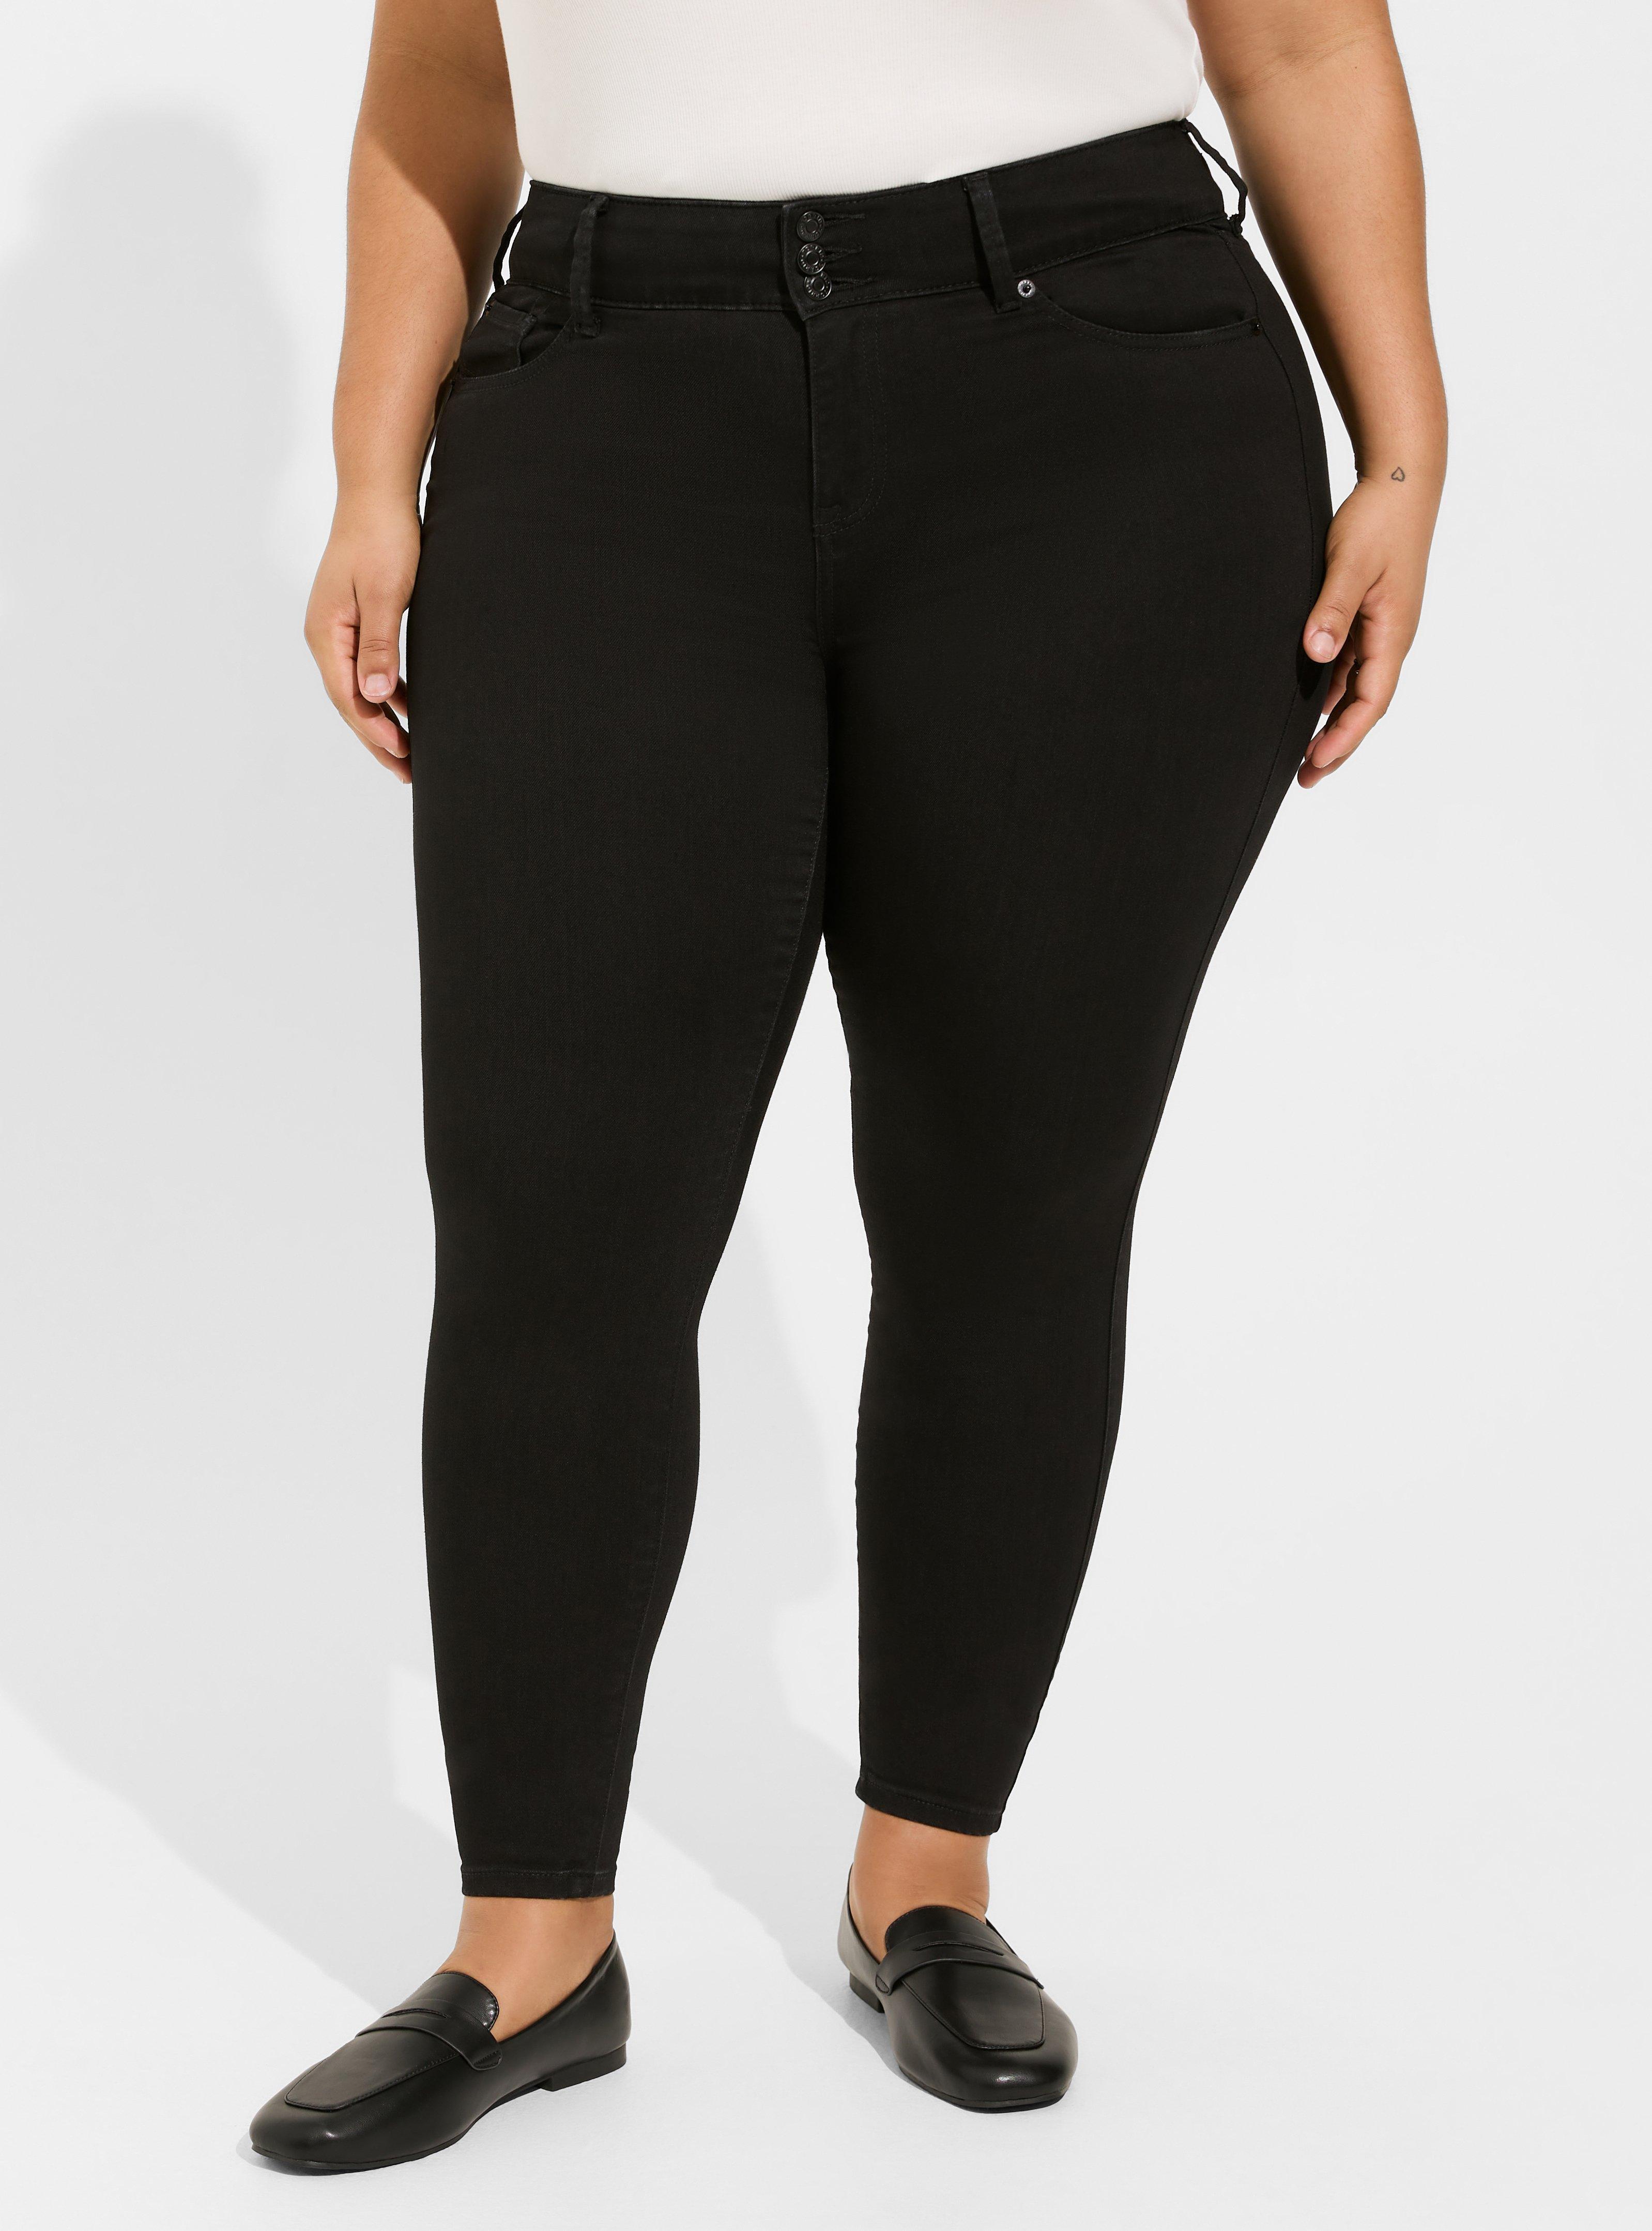 NO BOUNDARIES STAIGHT LEG JEGGING JEANS  High waisted black jeans, Ripped  jeggings, Cropped jeggings